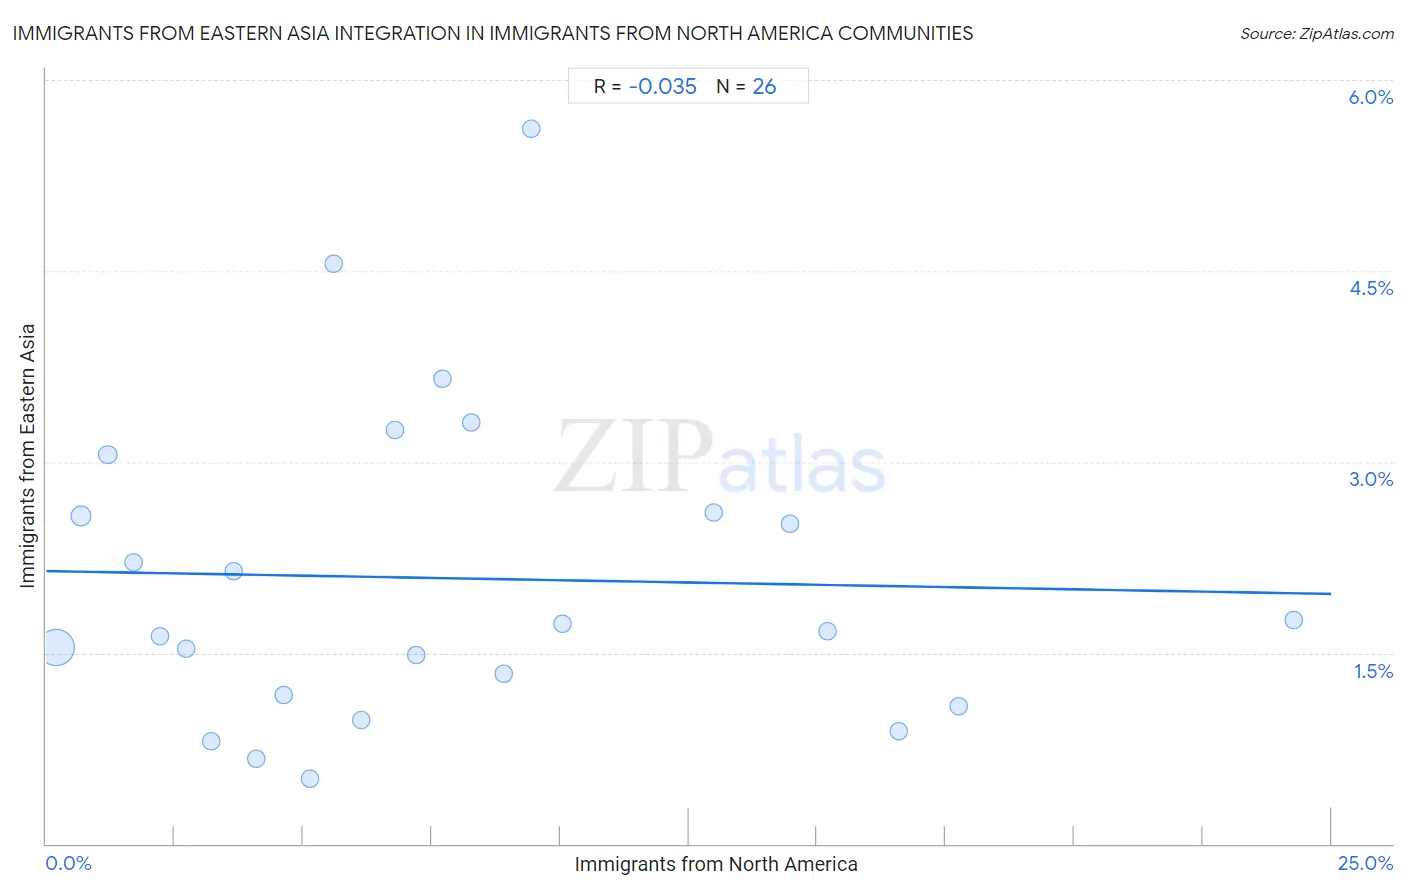 Immigrants from North America Integration in Immigrants from Eastern Asia Communities